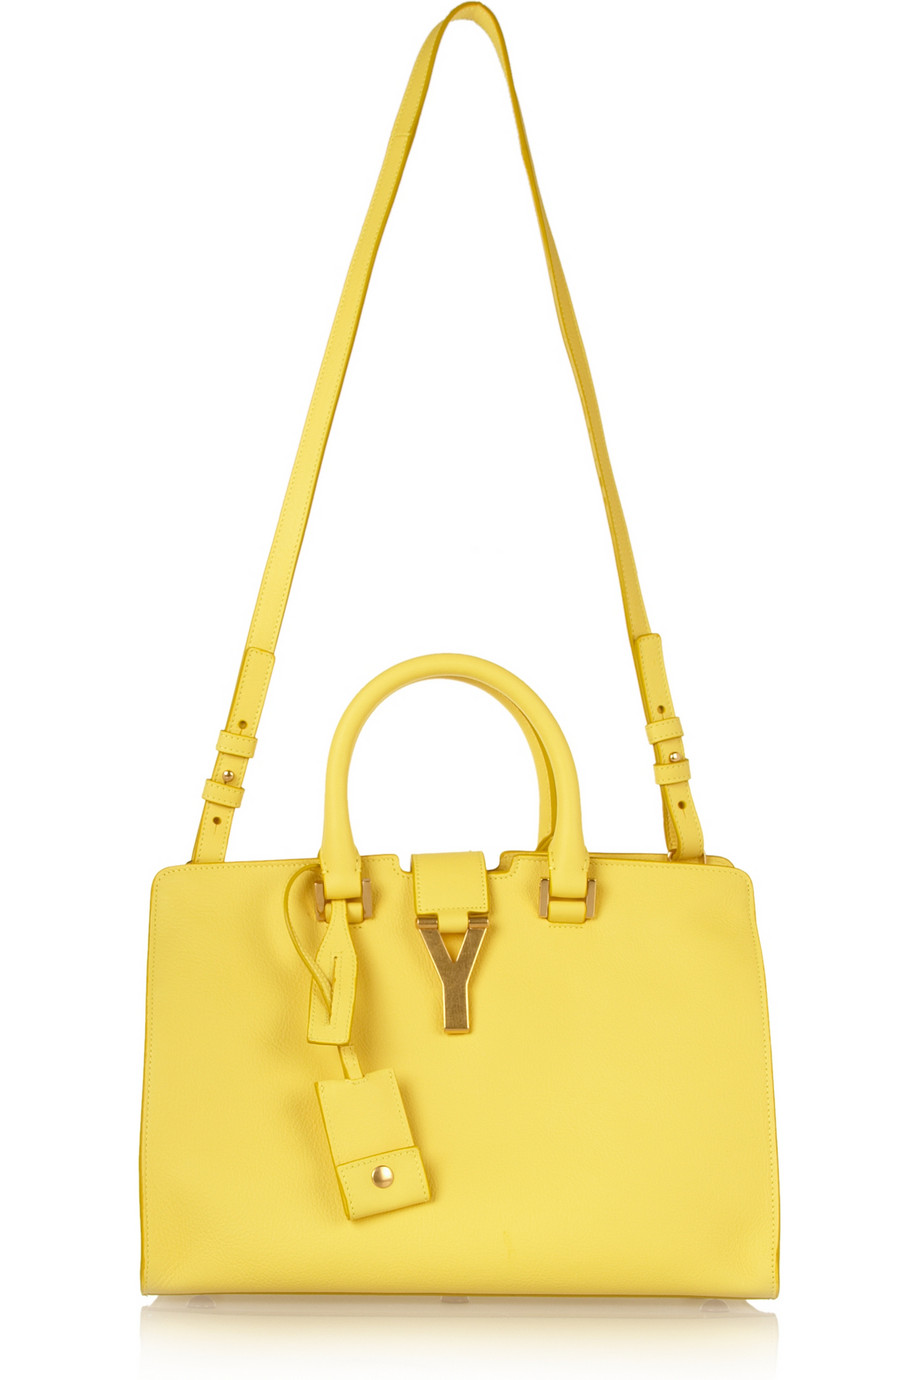 Saint Laurent The Cabas Small Leather Shoulder Bag in Yellow - Lyst